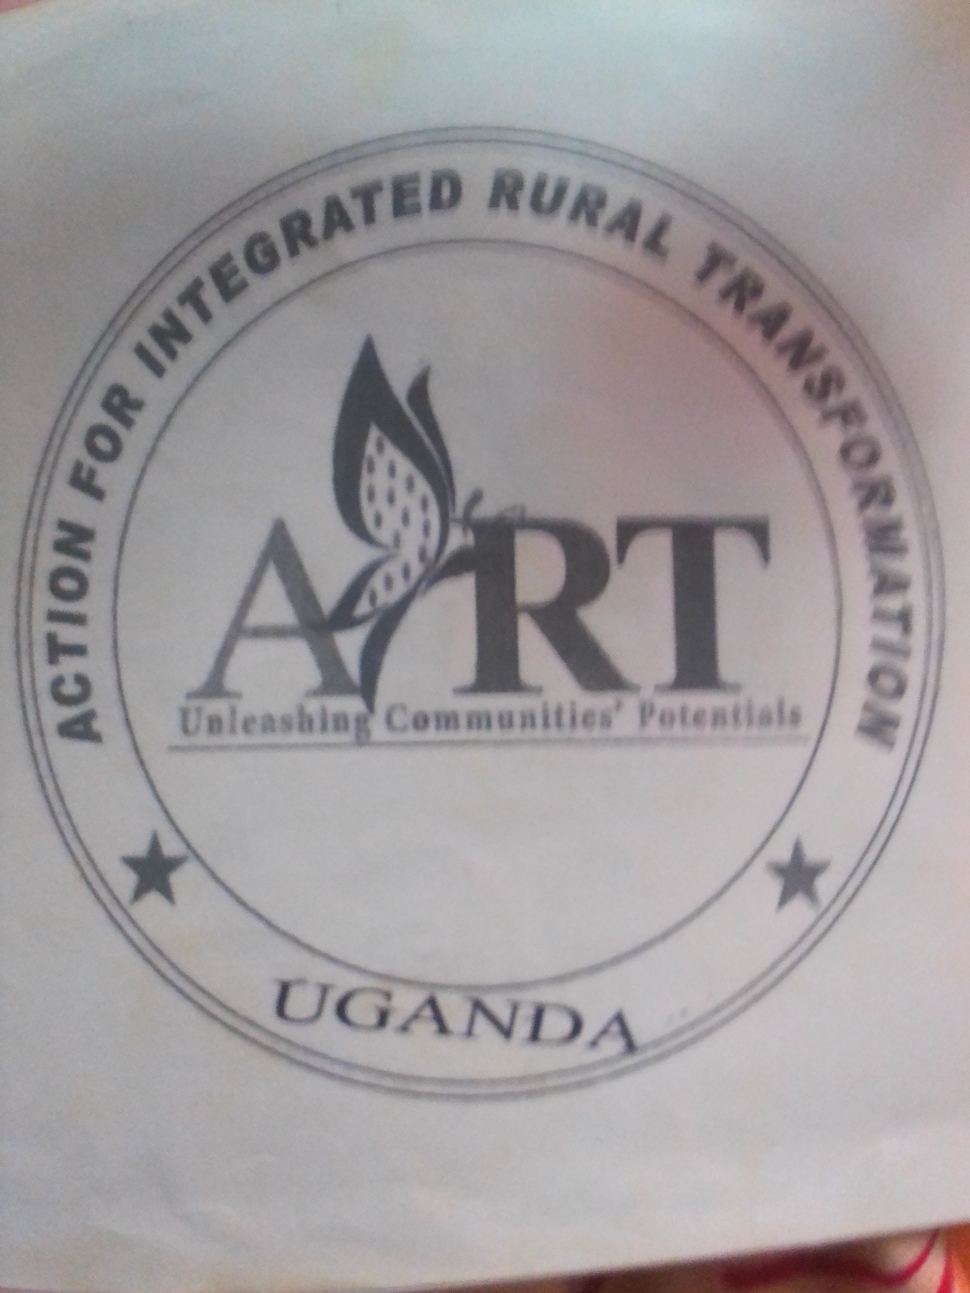 Action for integrated rural transformation user picture